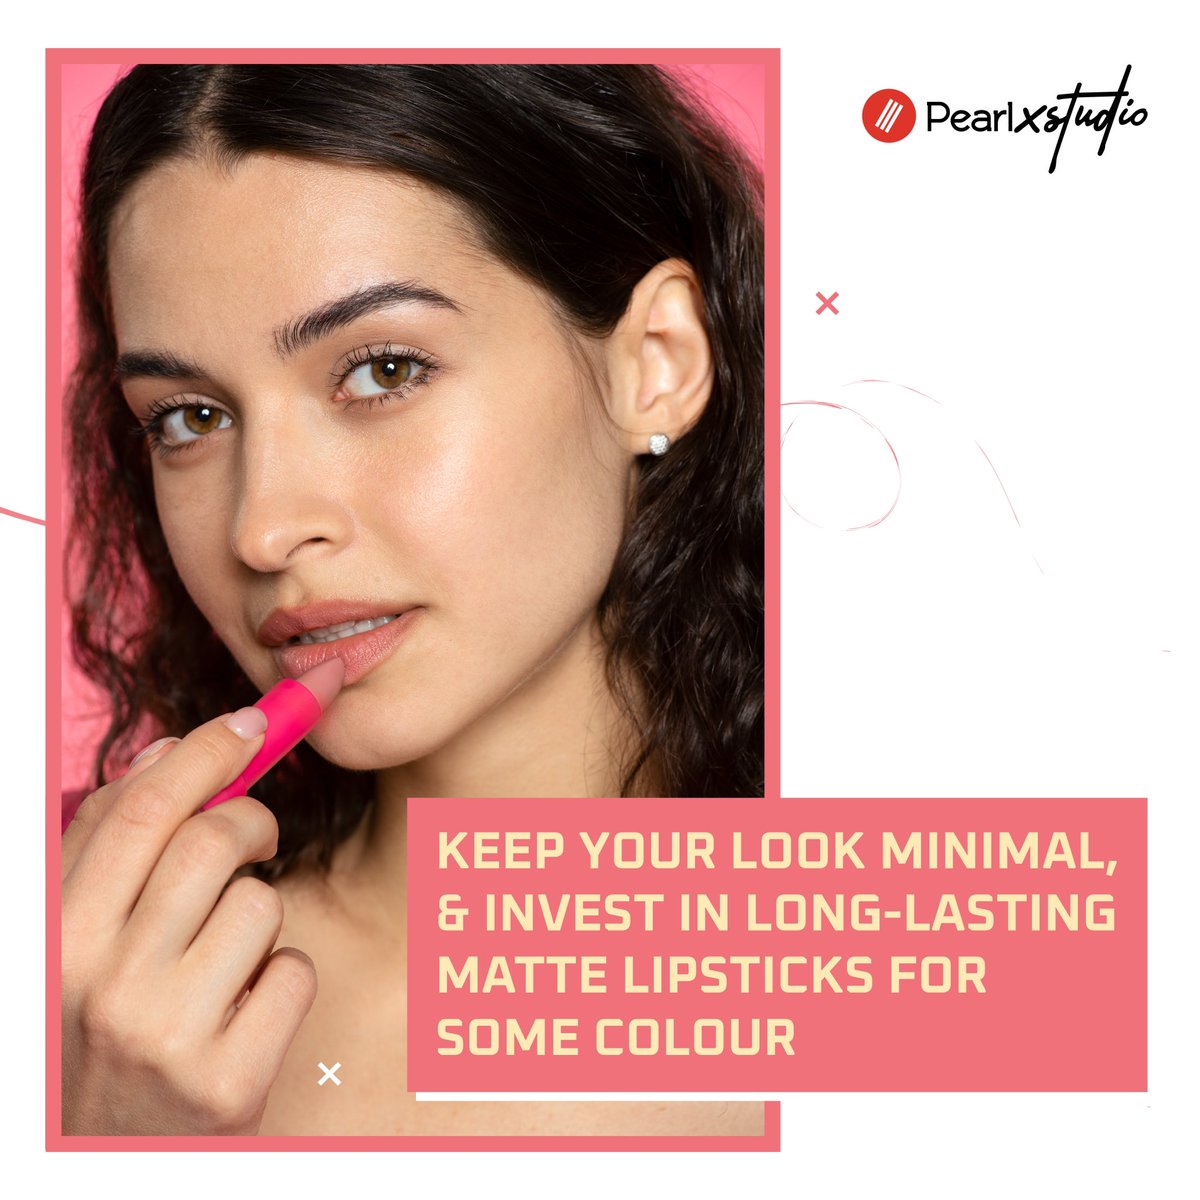 Upgrade your makeup kit to stand up to the heat this summer🥵. These 3 tips will ensure you look your gorgeous self in this humid weather💅💯! Is there anything we missed? Share your recommendations below👇

#PearlxStudio #PowerYourPassion #PearlAcademy #MakeupTips #SummerMakeup